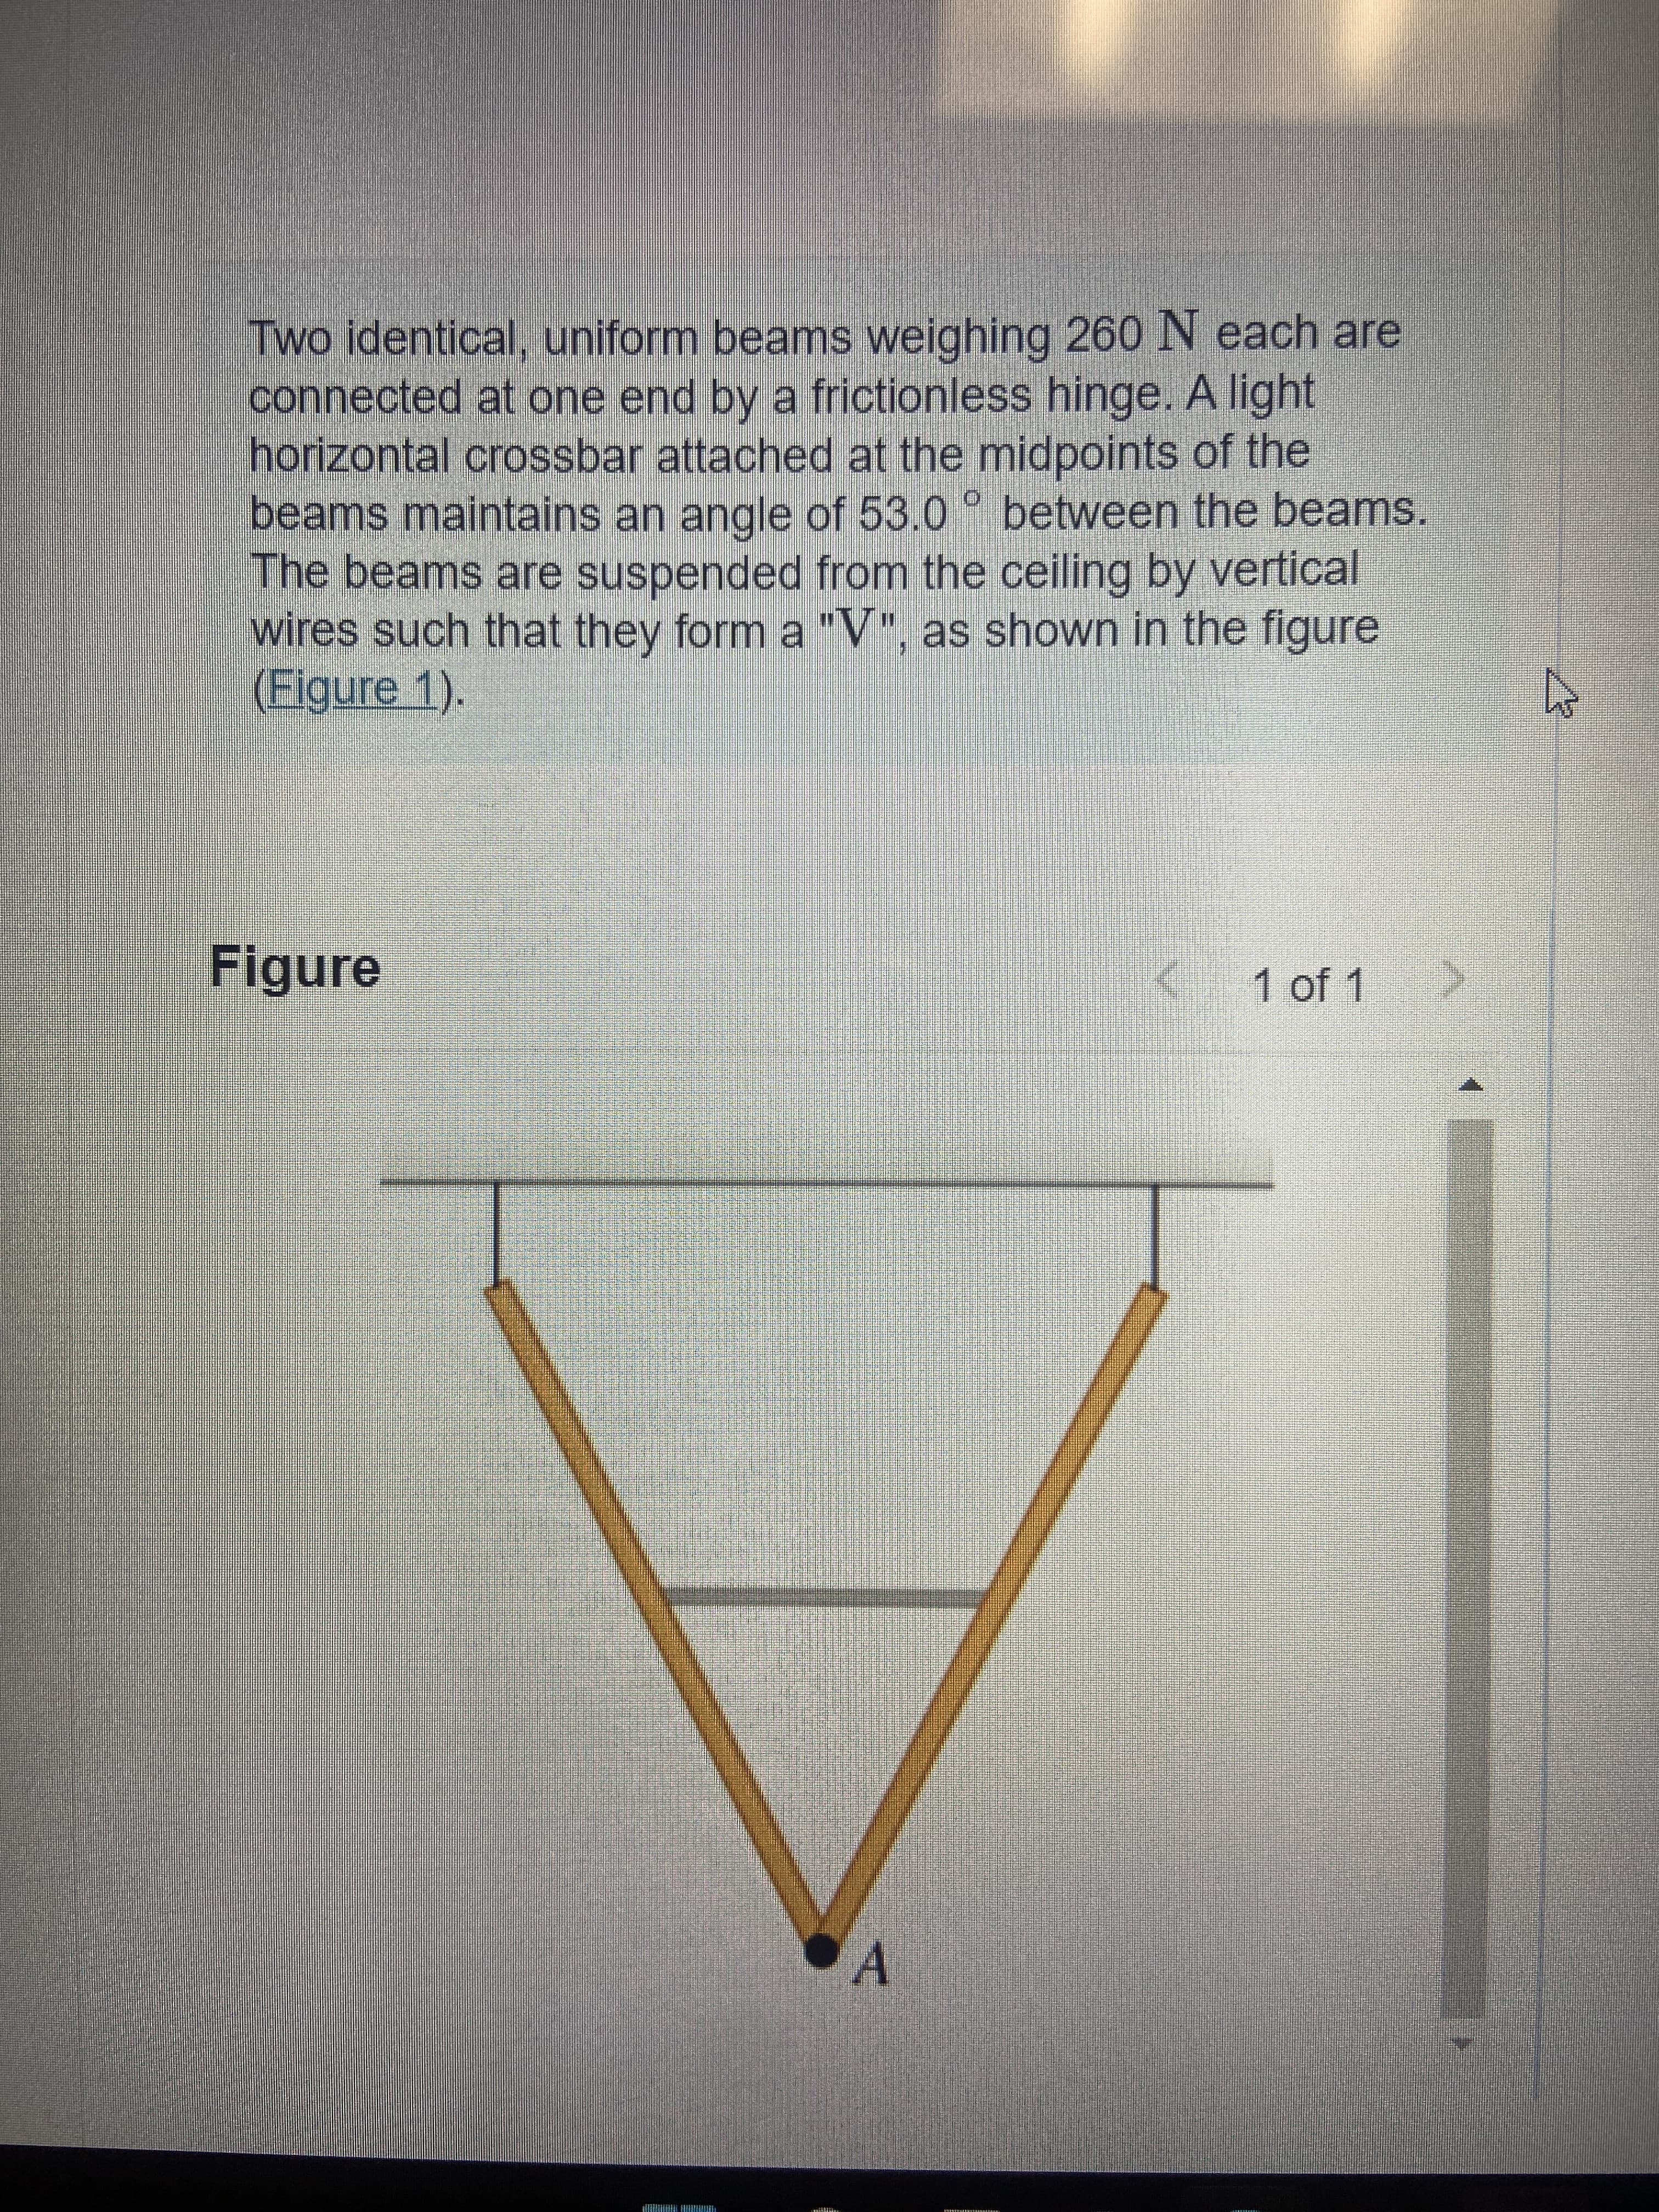 [B]
Two identical, uniform beams weighing 260 N each are
connected at one end by a frictionless hinge. A light
horizontal crossbar attached at the midpoints of the
beams maintains an angle of 53.0 between the beams.
The beams are suspended from the ceiling by vertical
wires such that they form a "V", as shown in the figure
(Figure 1).
Figure
K 1 of 1
A
W